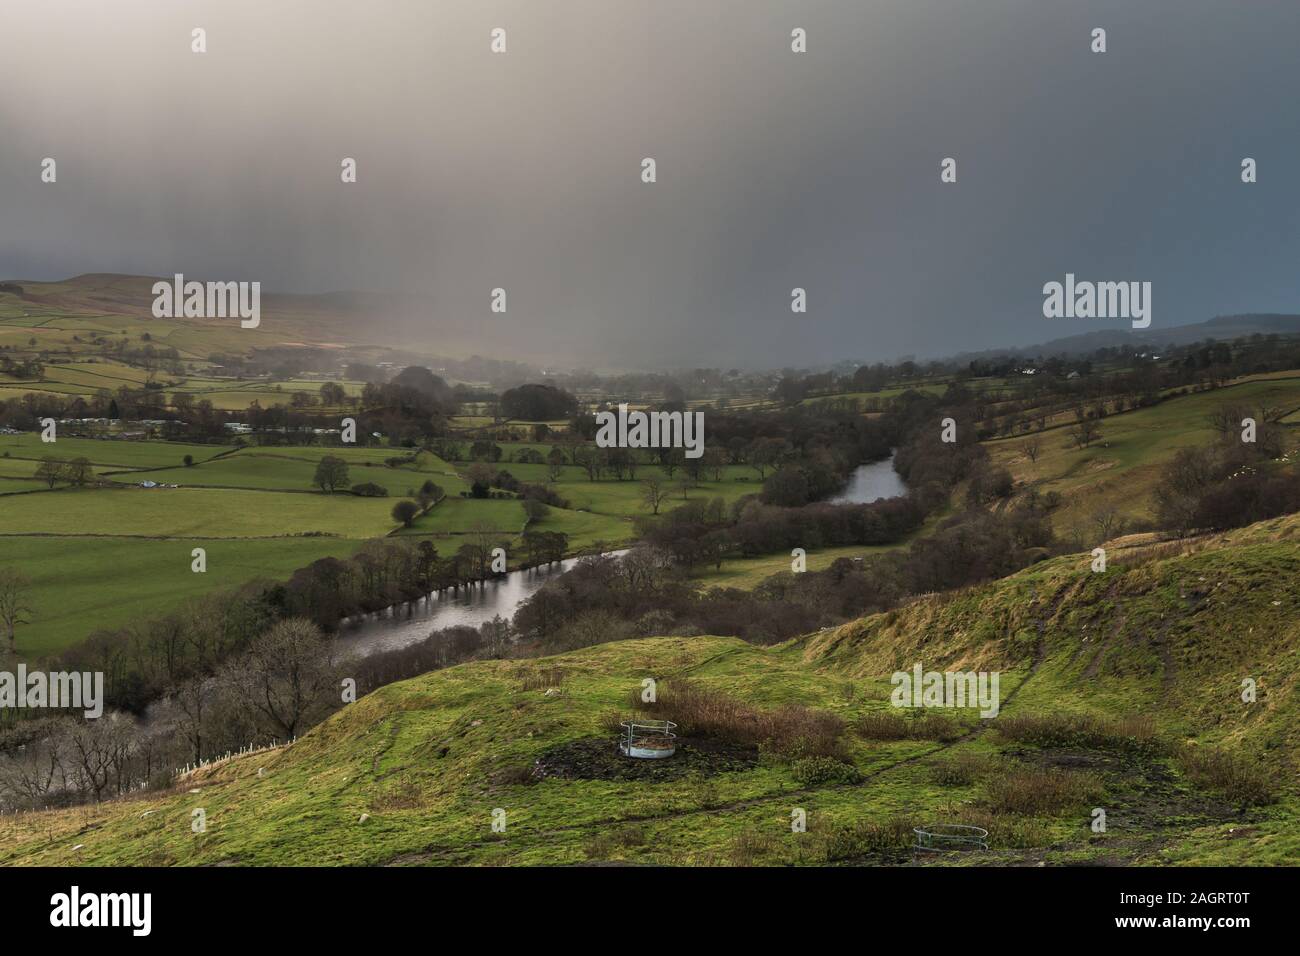 Torrential Downpour over Middleton in Teesdale during Storm Atiyah 8 Dec 2019 Stock Photo